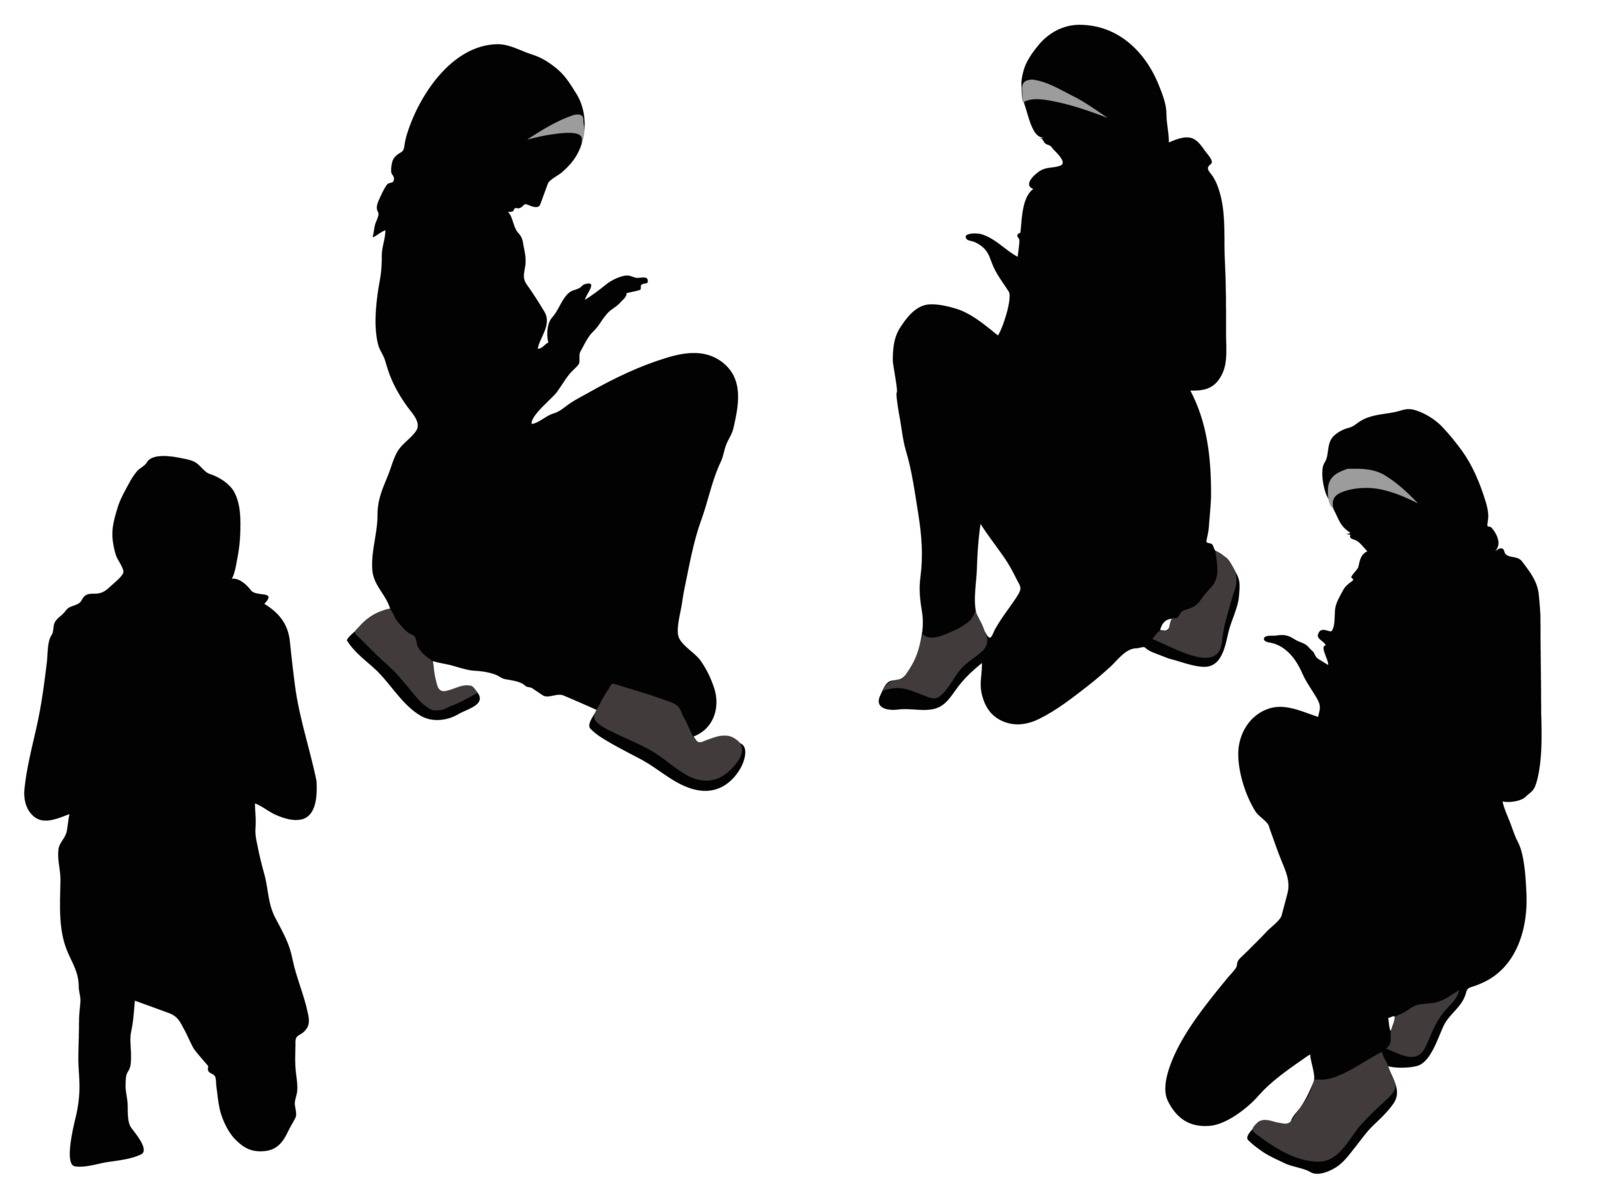 EPS 10 vector illustration of Muslim woman silhouette in pray pose